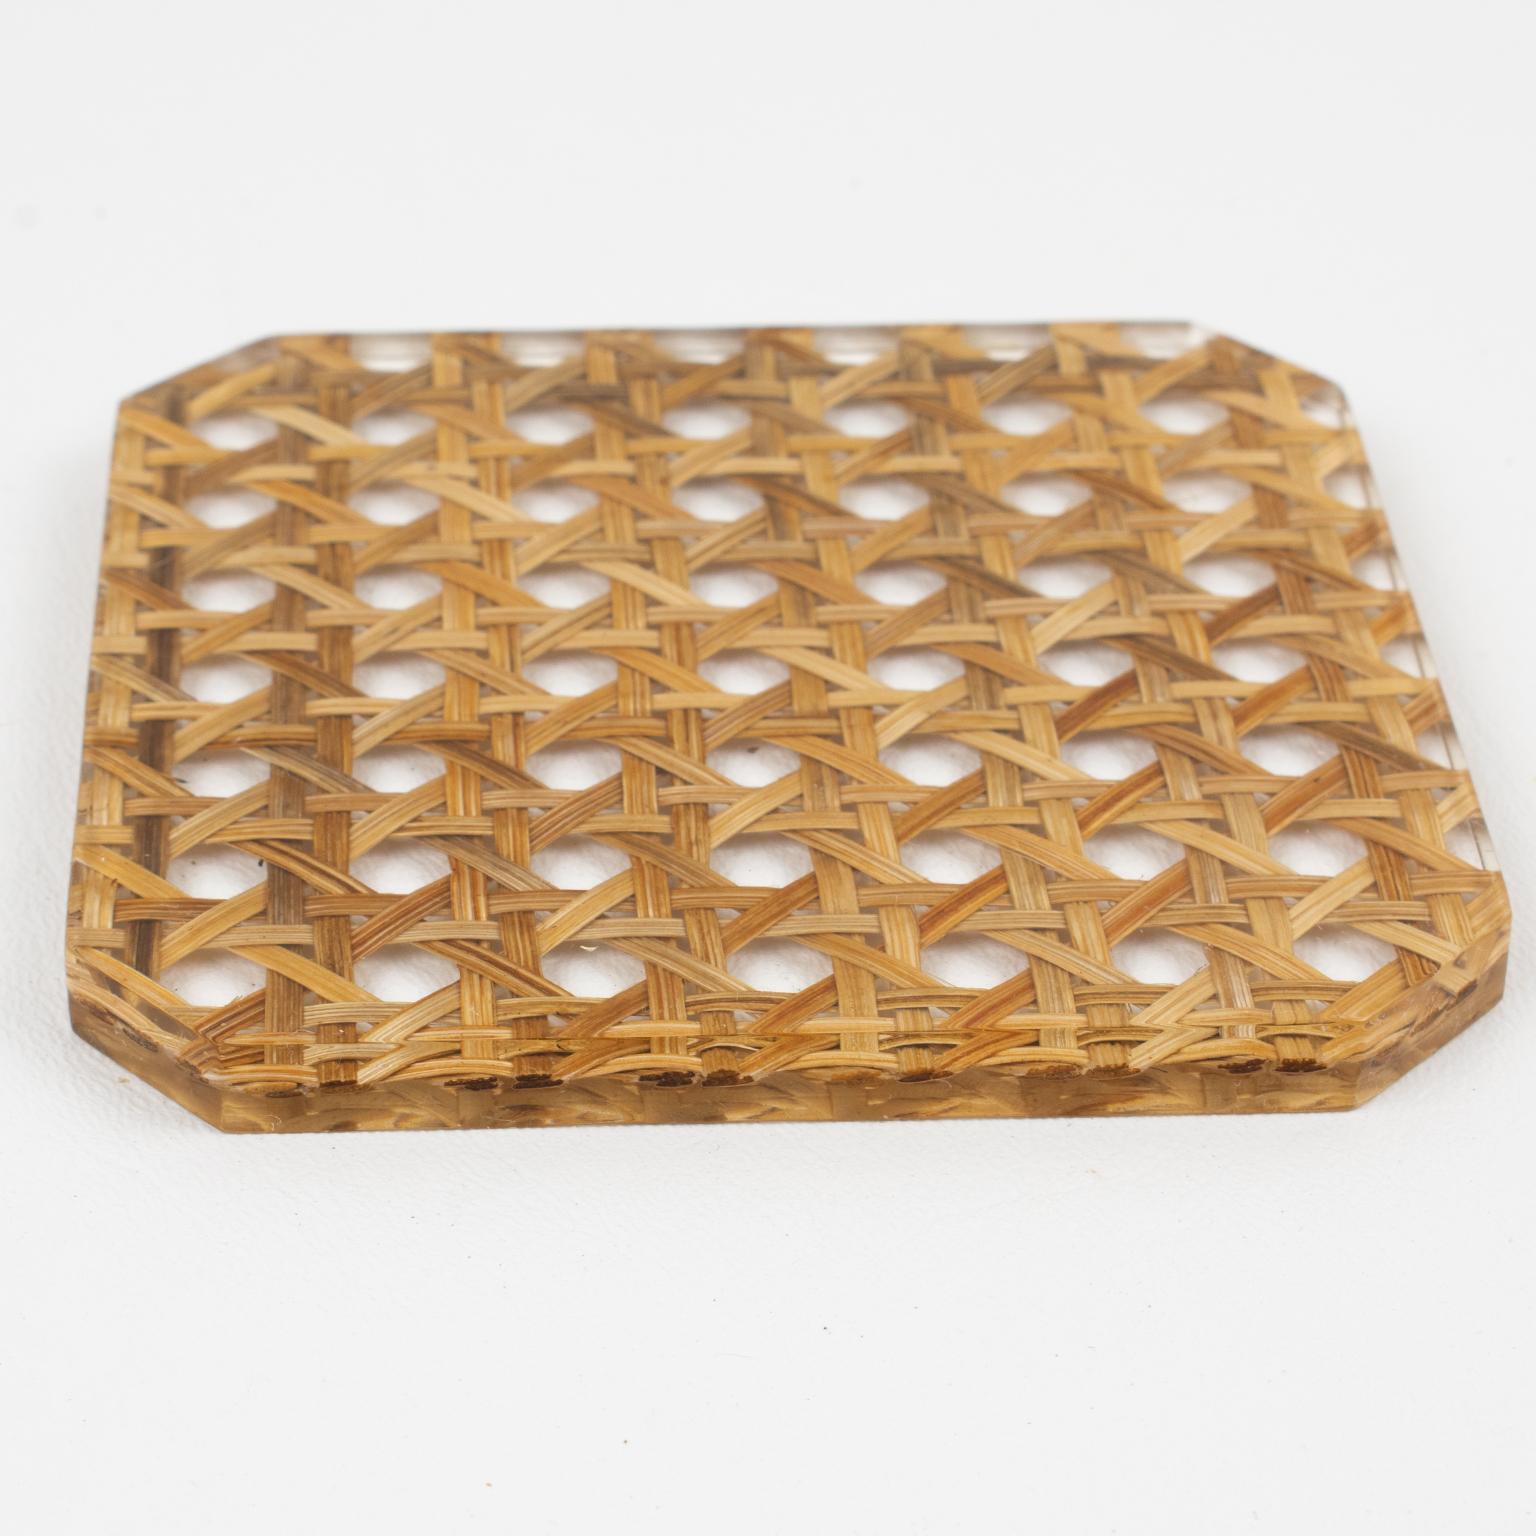 Late 20th Century Christian Dior Lucite and Rattan Barware Coaster, 6 pieces